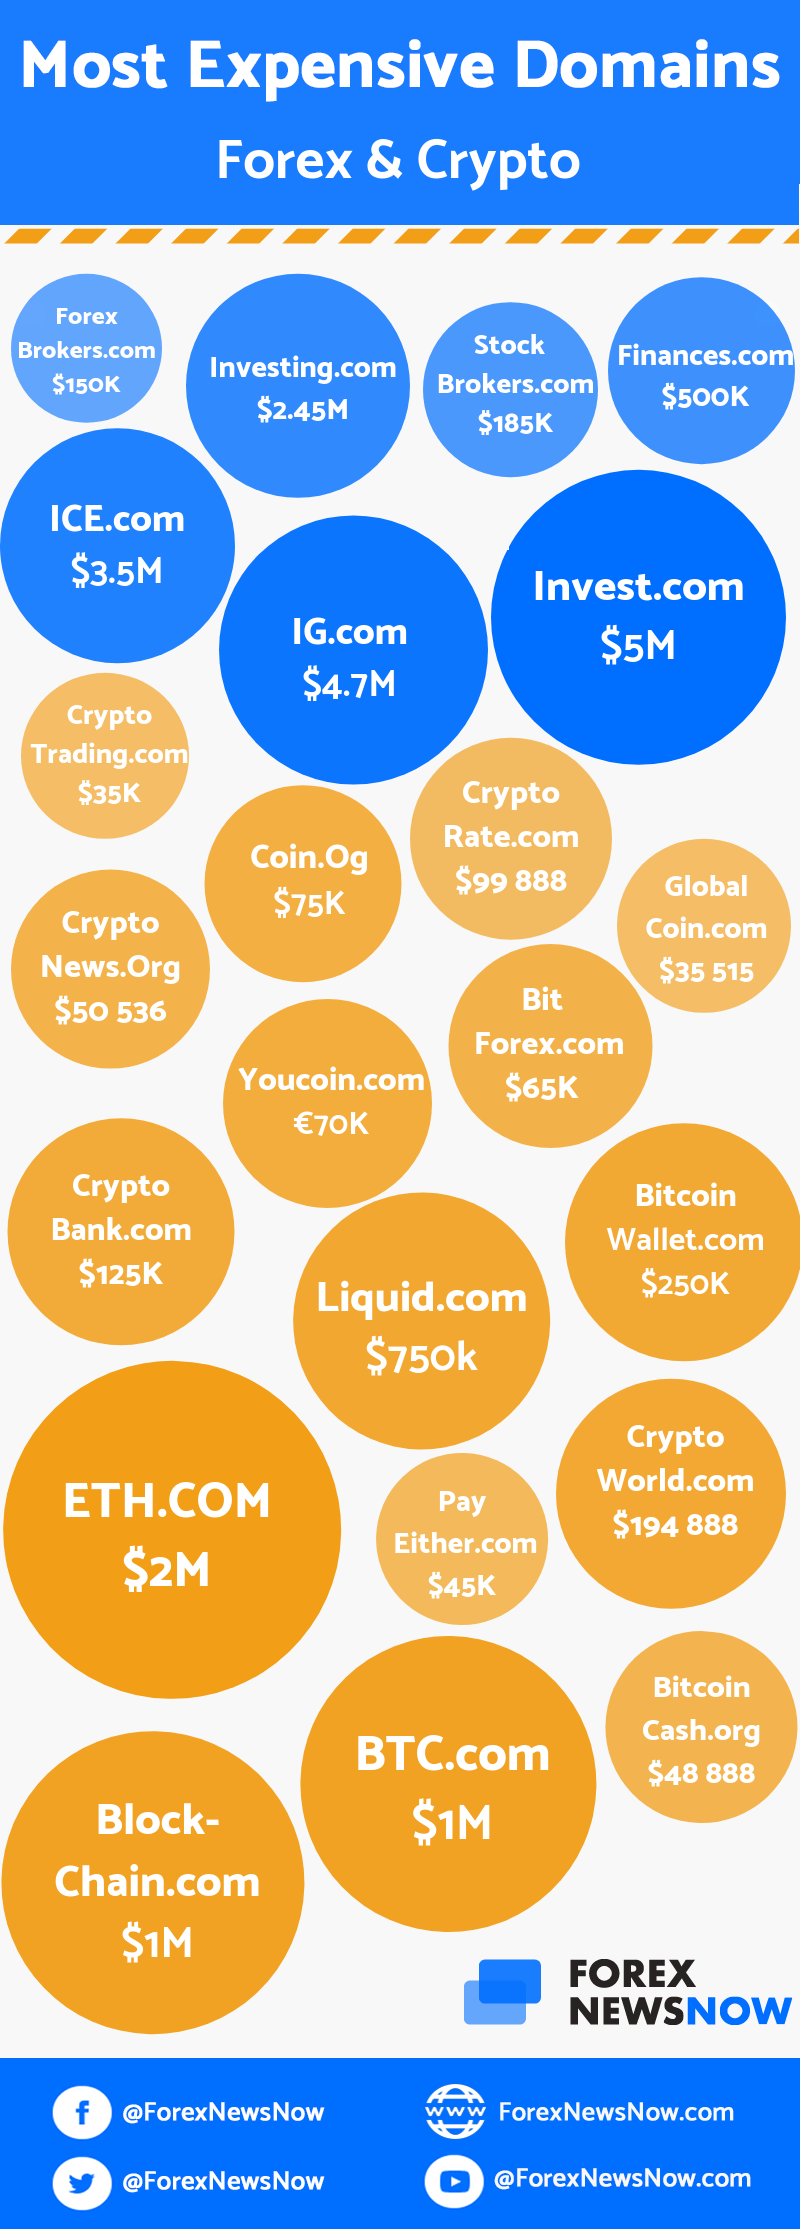 most-expensive-forex-crypto-domains.png